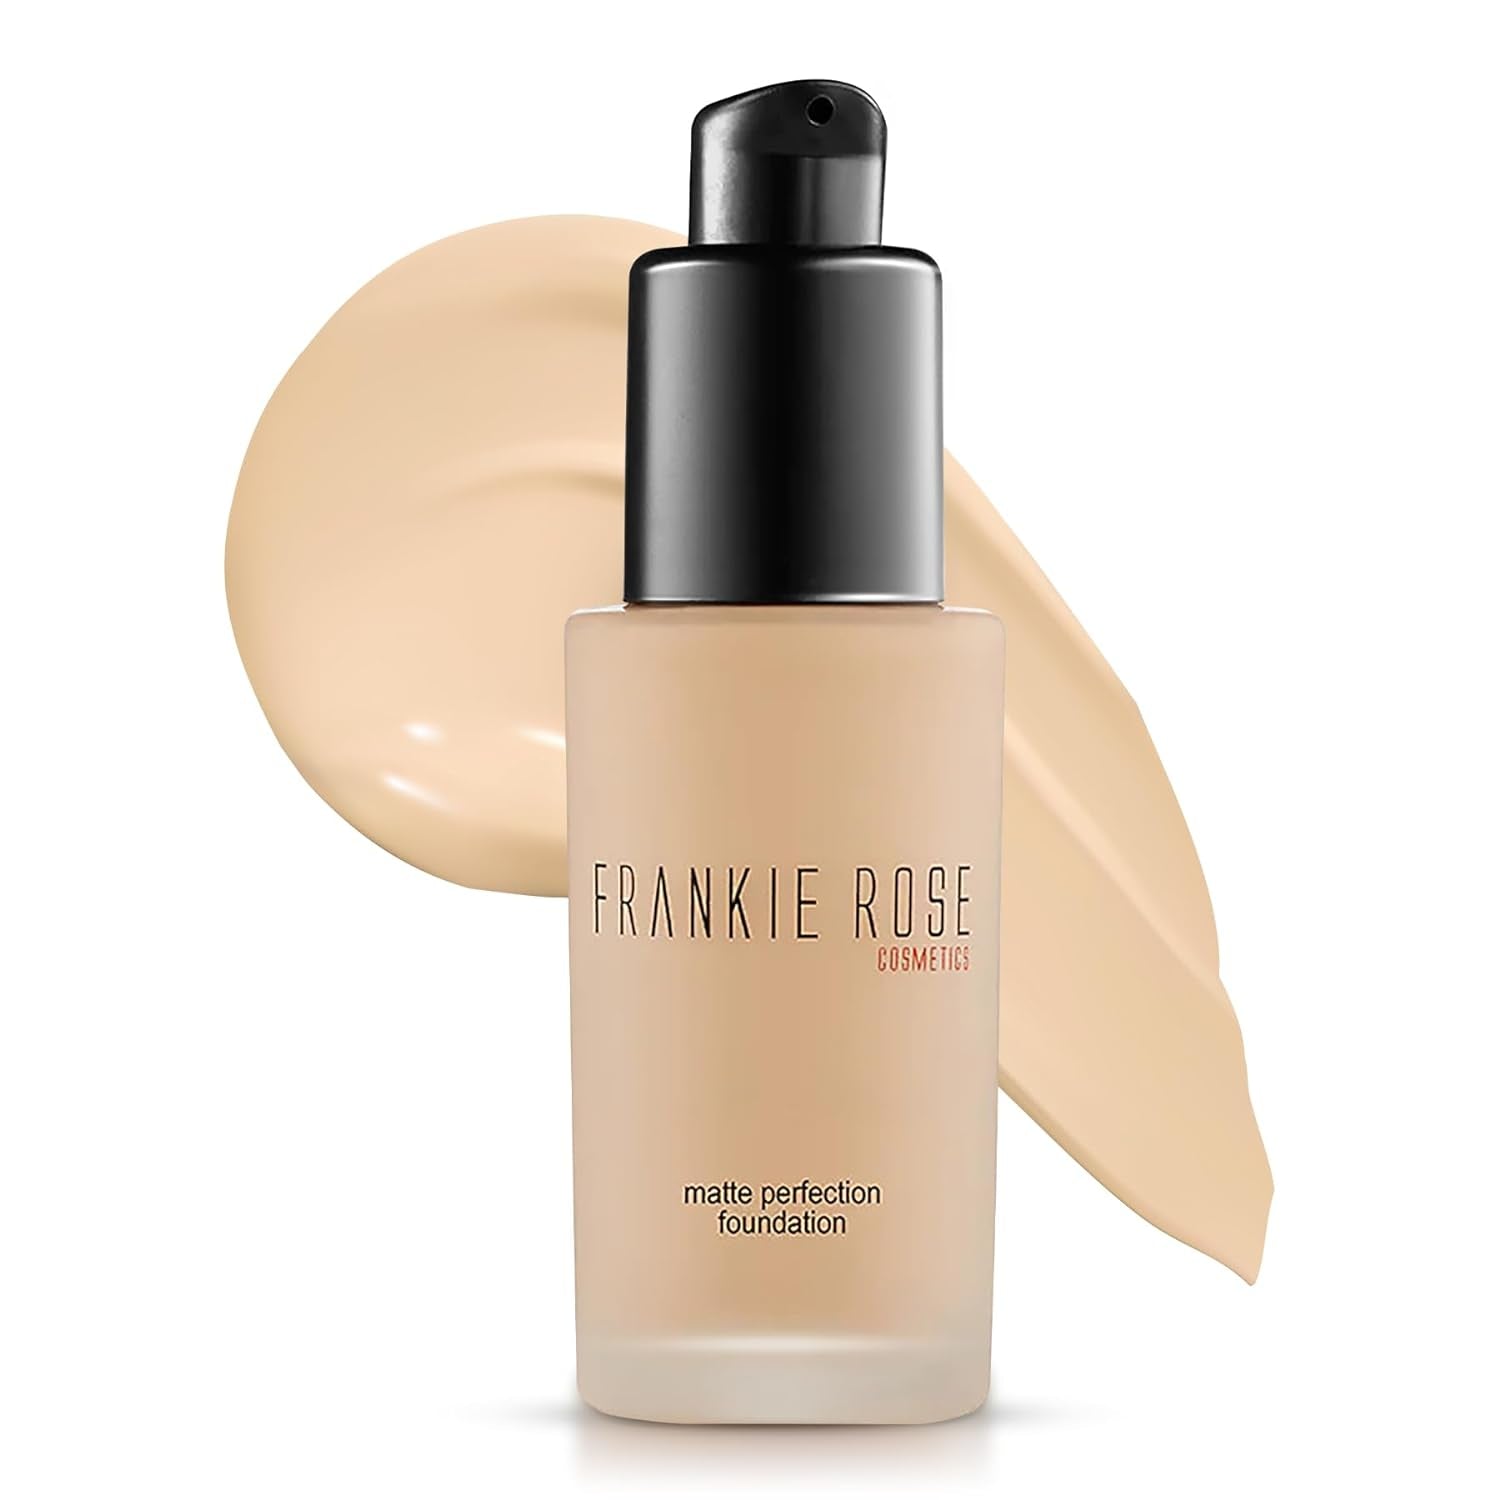 Matte Perfection Foundation Makeup – Long-Lasting, Hydrating Foundation for Semi-Matte Finish - Foundation Full Coverage for All Skin Types - (China Silk) 1.0 US Fl Oz / 30 Ml